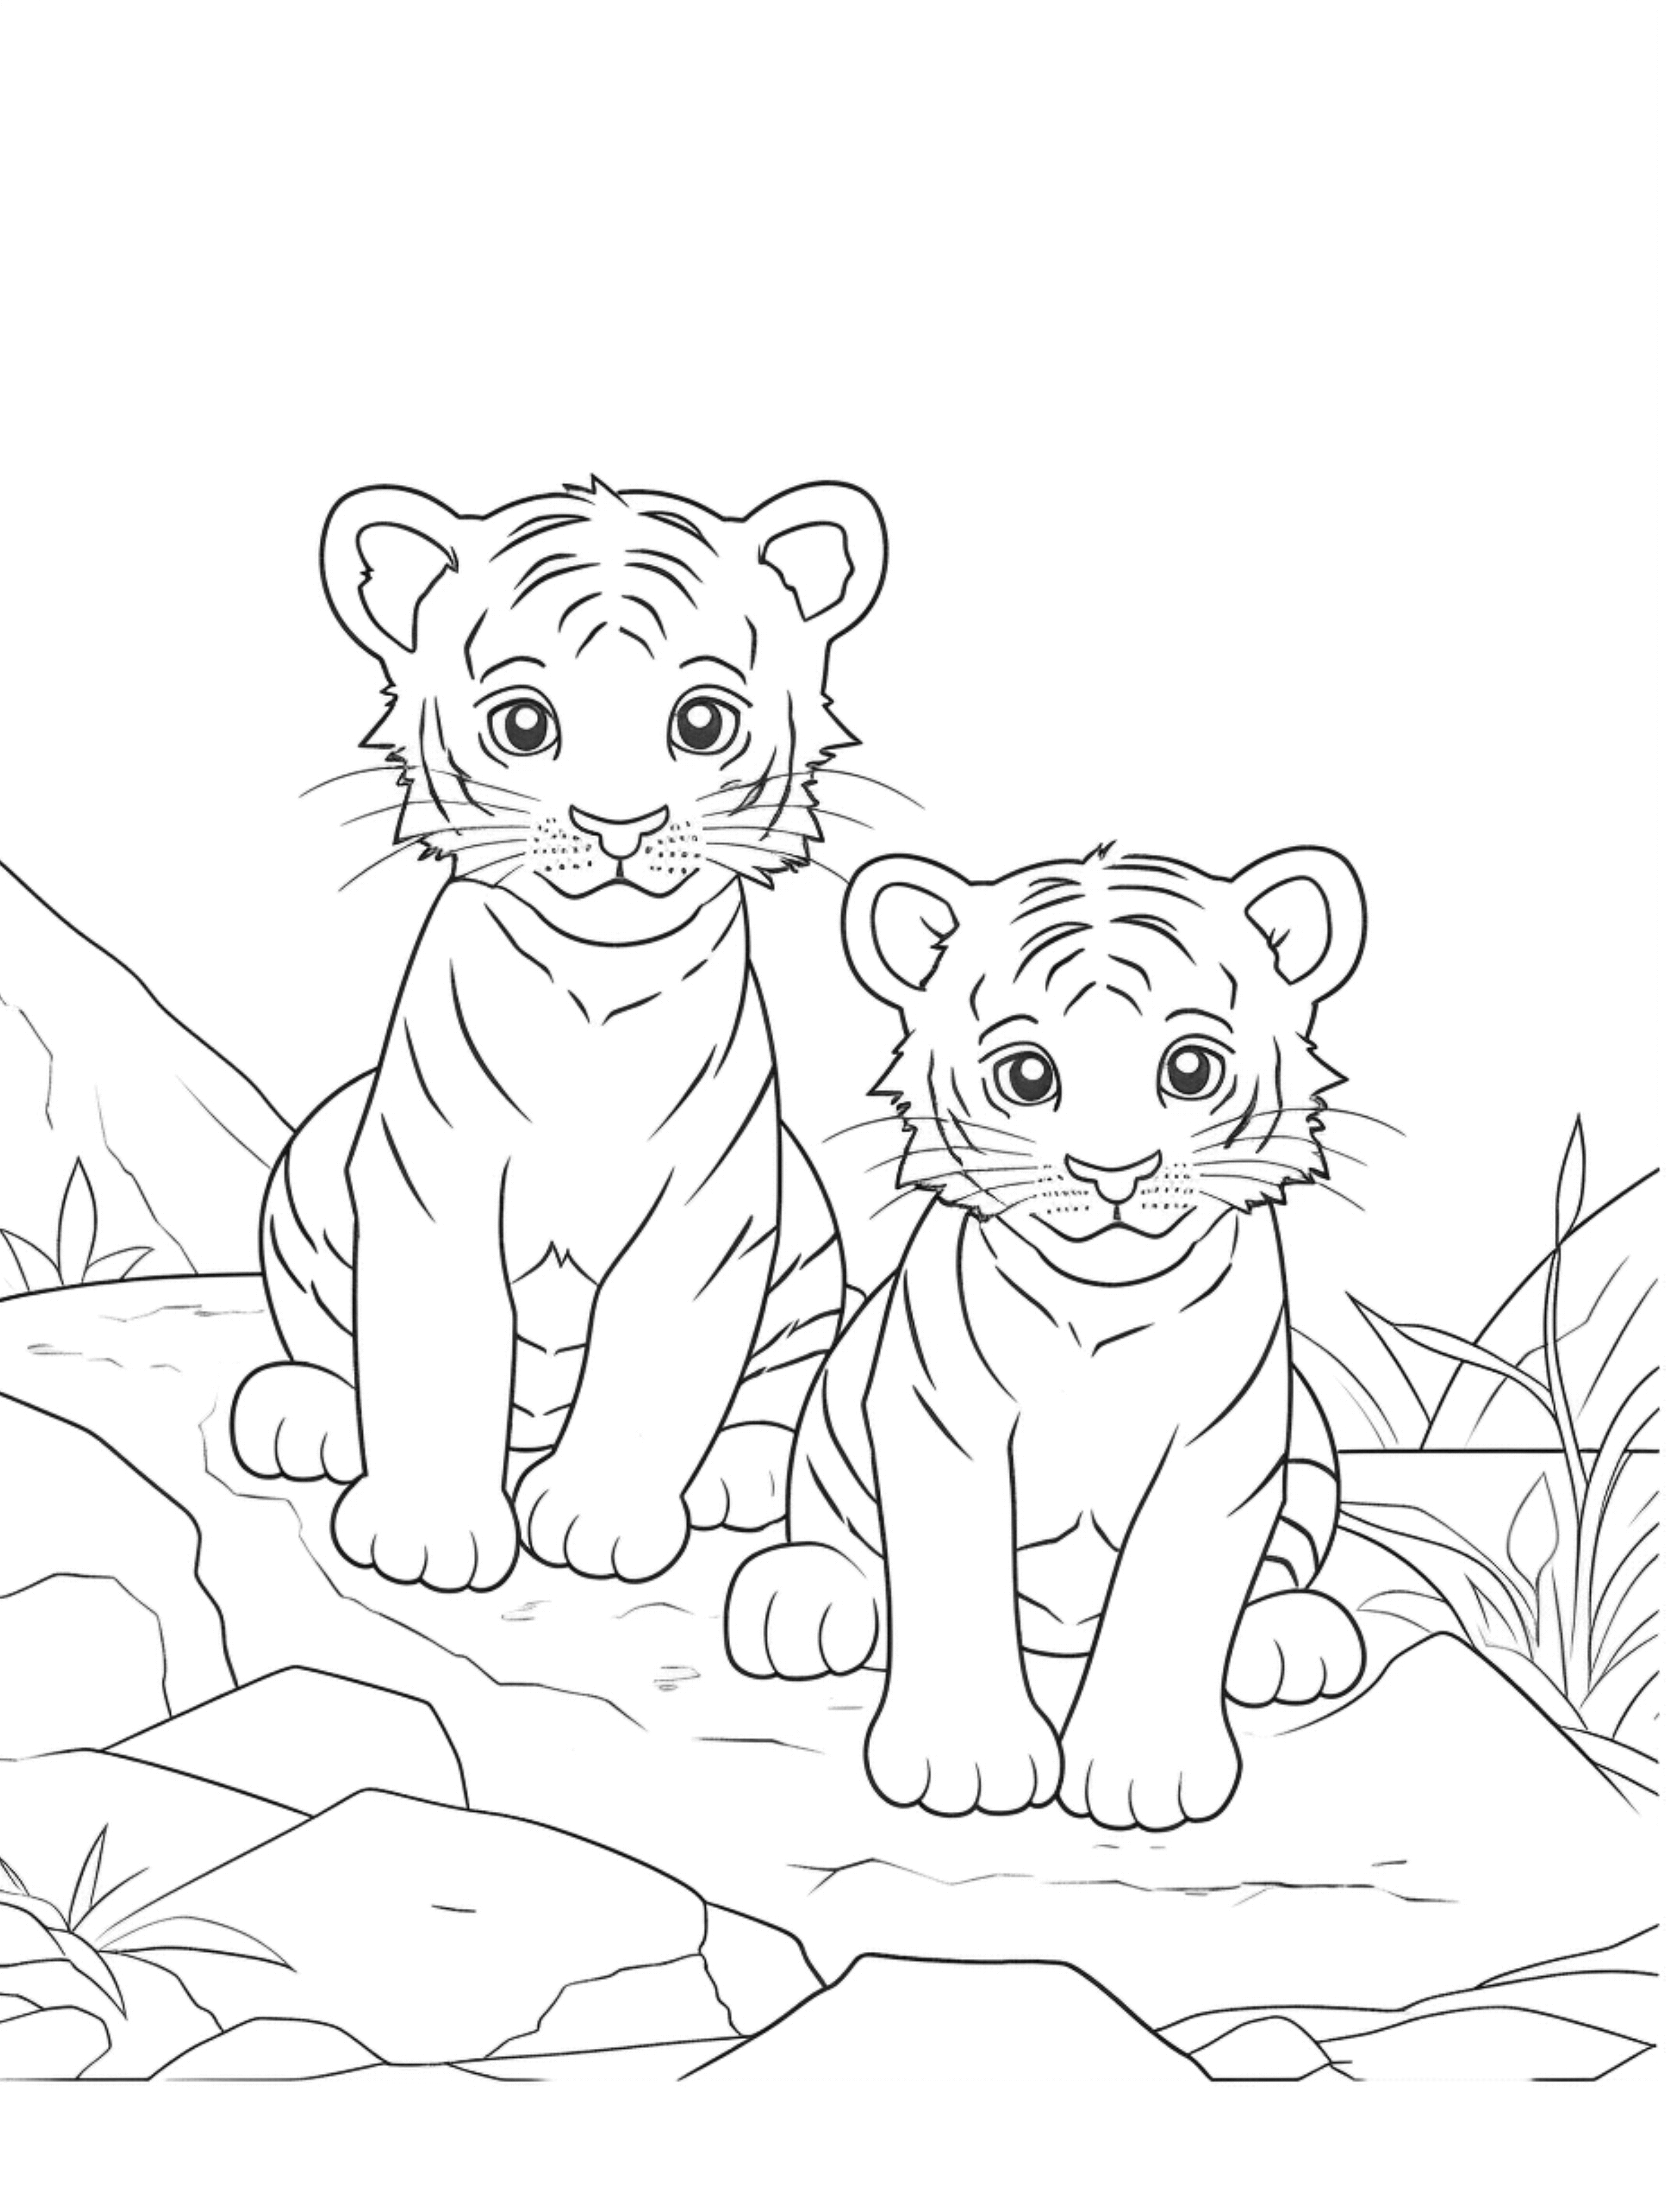 coloring pages of cute baby tigers